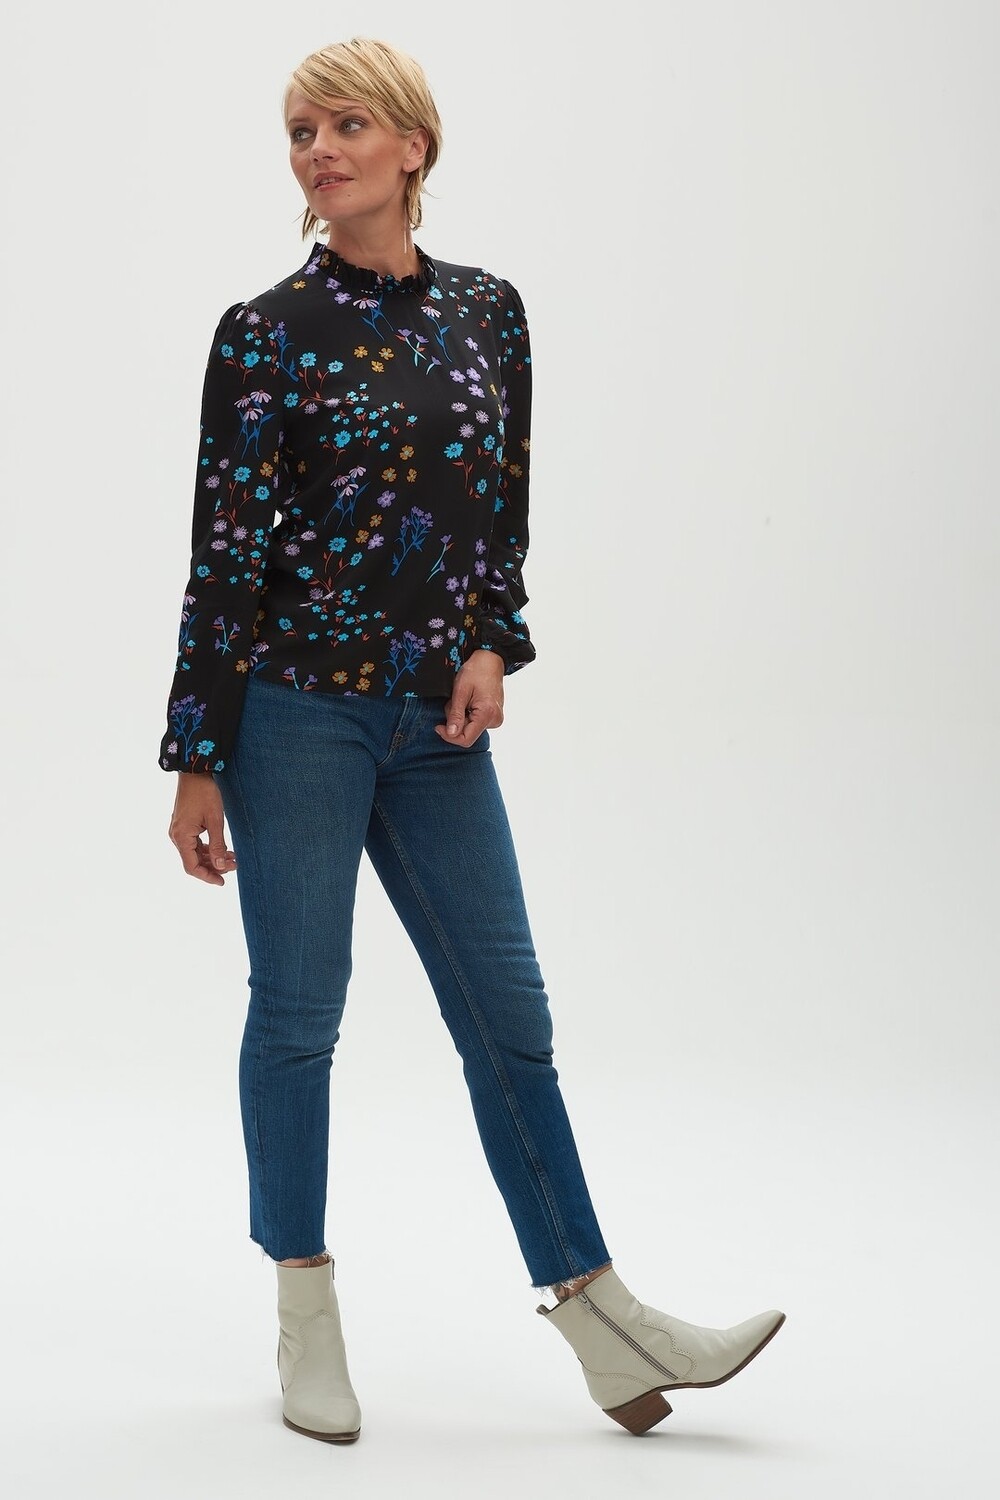 Maybell Black Floral Frill Neck Blouse